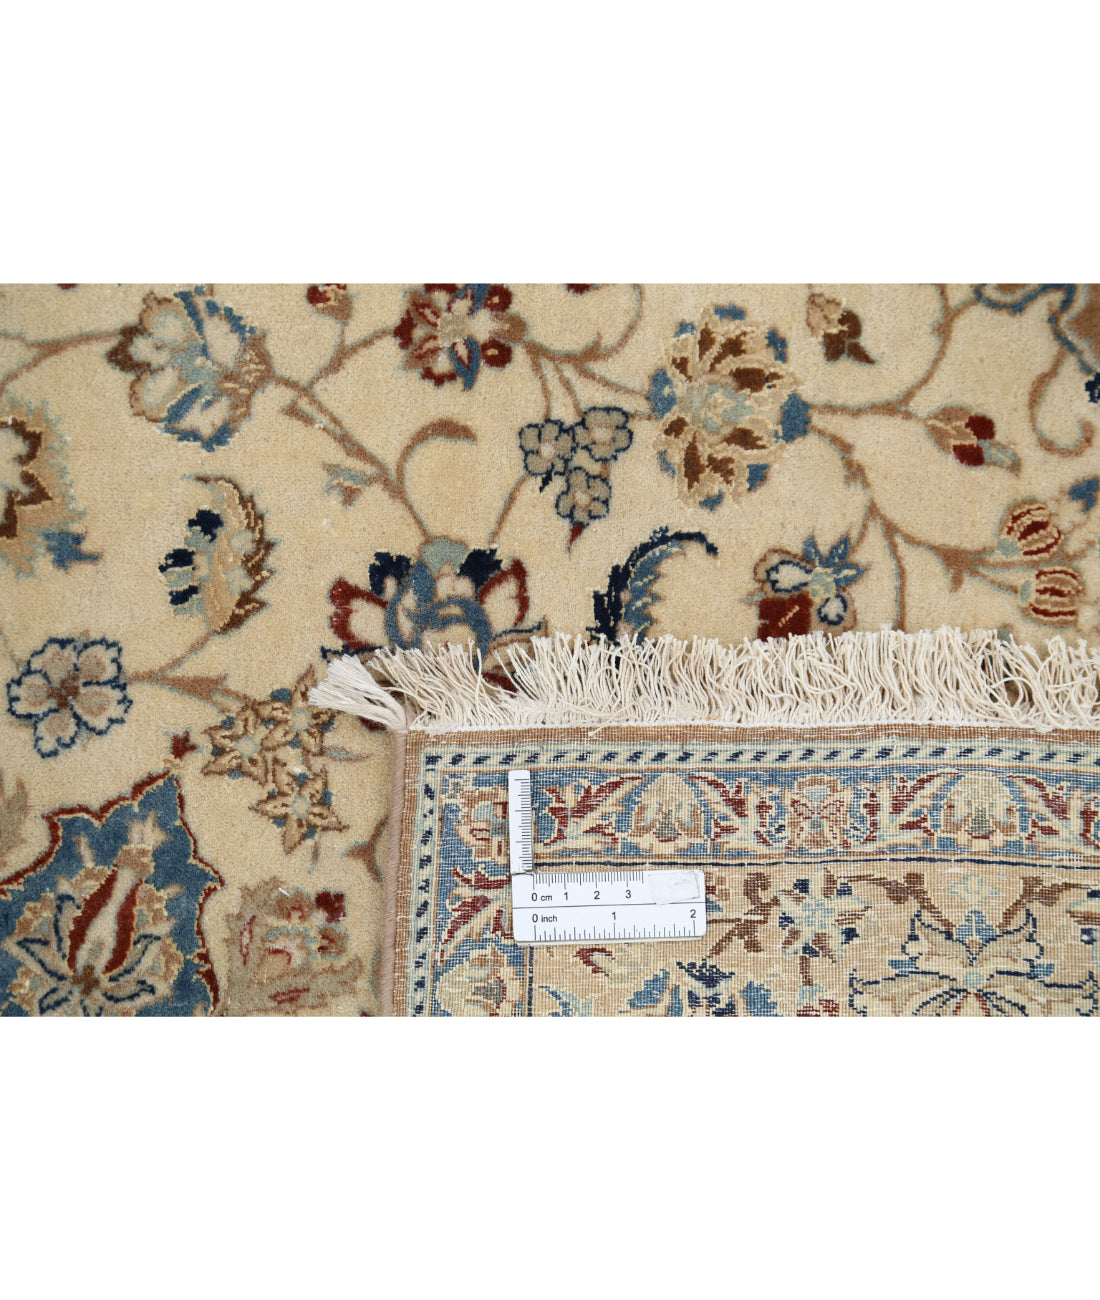 Hand Knotted Masterpiece Persian Nain Wool & Silk Rug - 3'7'' x 5'6'' 3'7'' x 5'6'' (108 X 165) / Ivory / Taupe